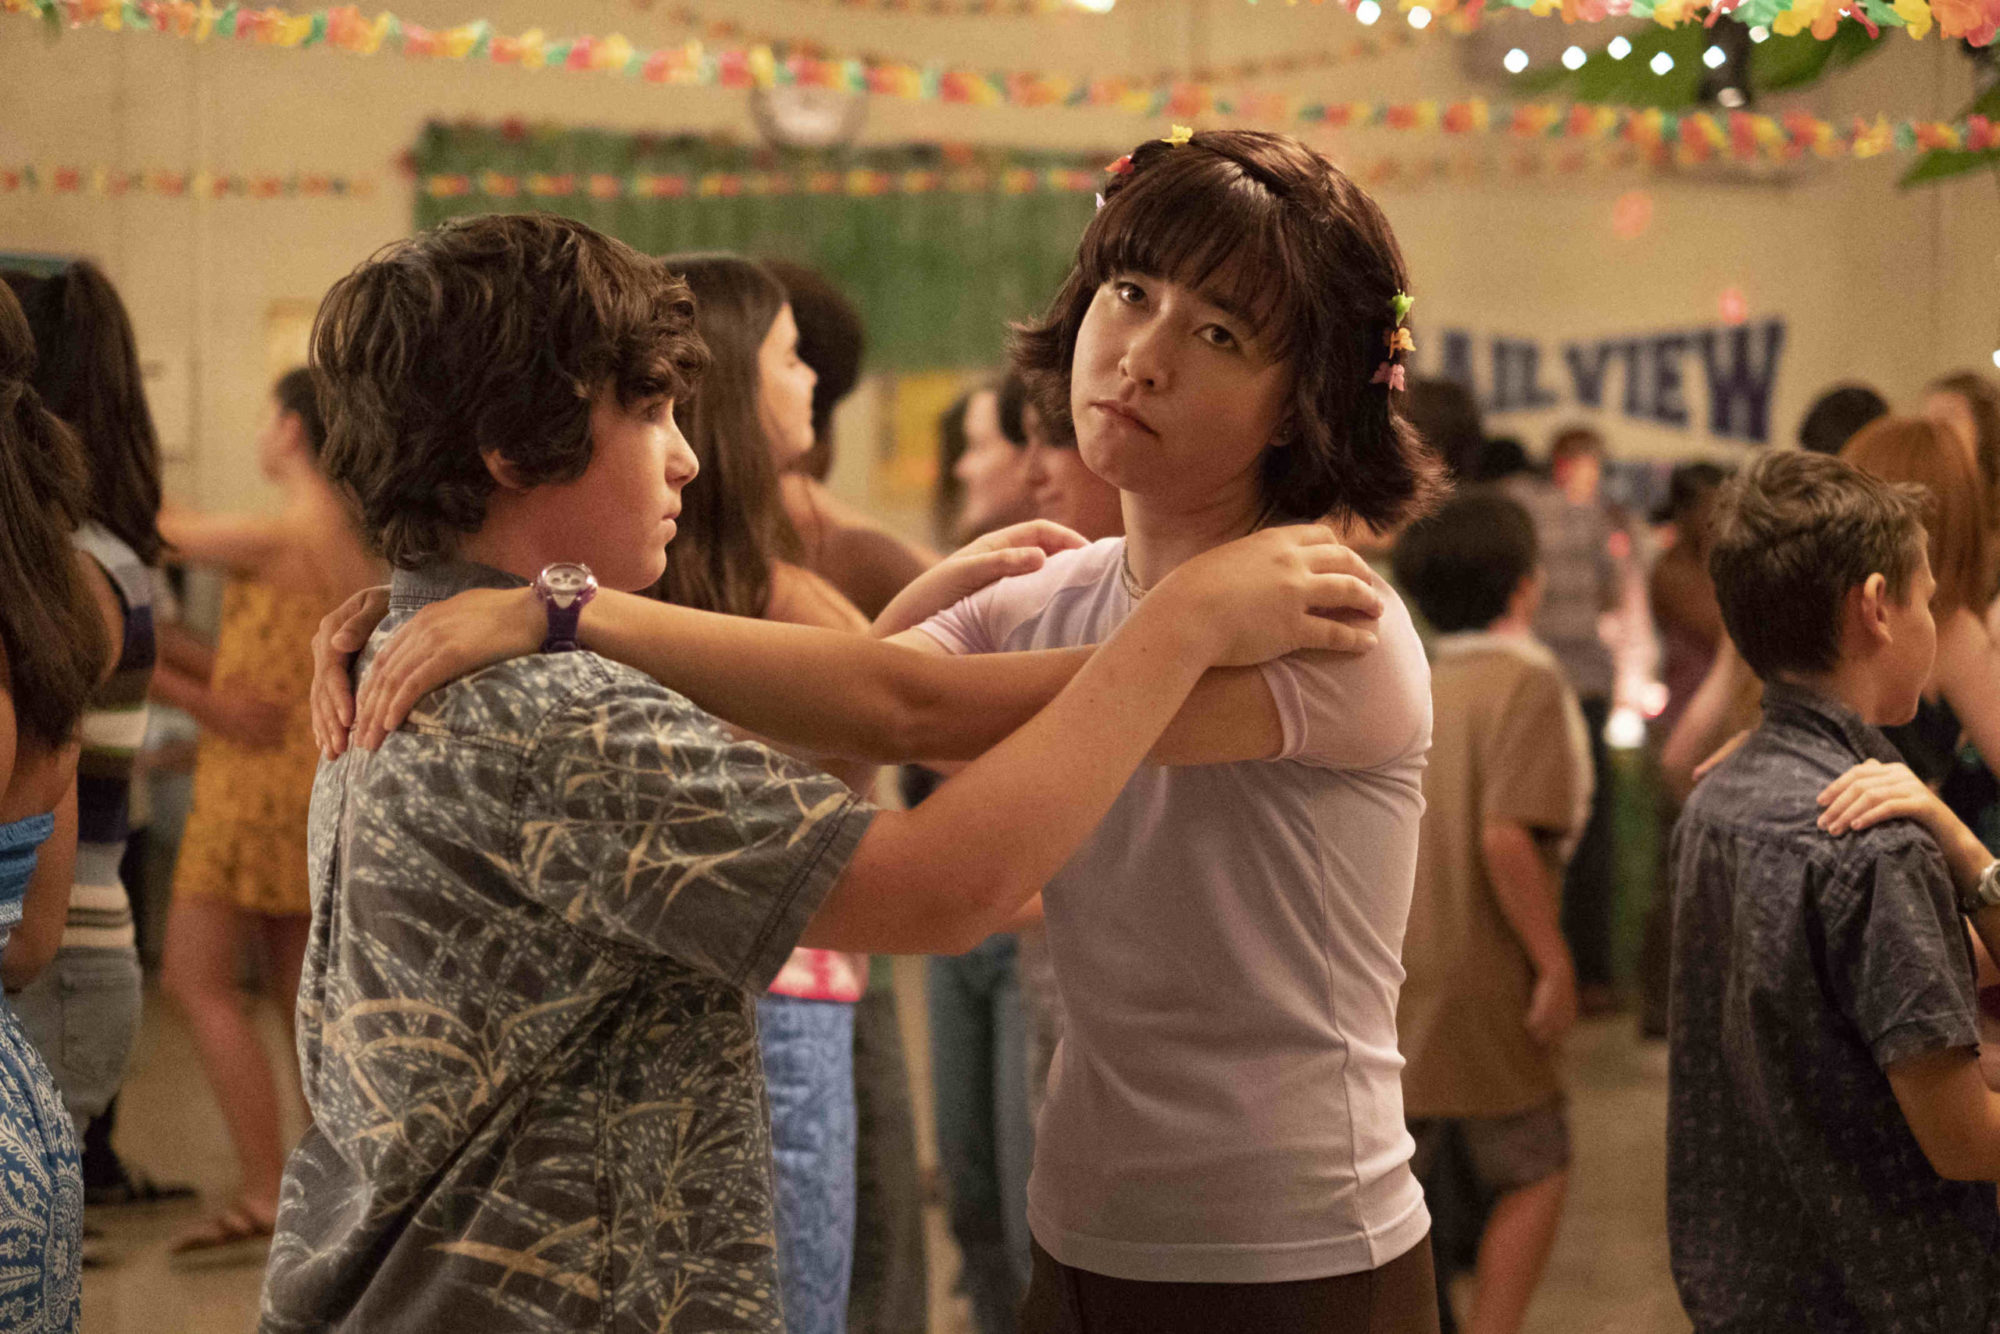 Actress Maya Erskine at a middle school dance in a scene from TV show 